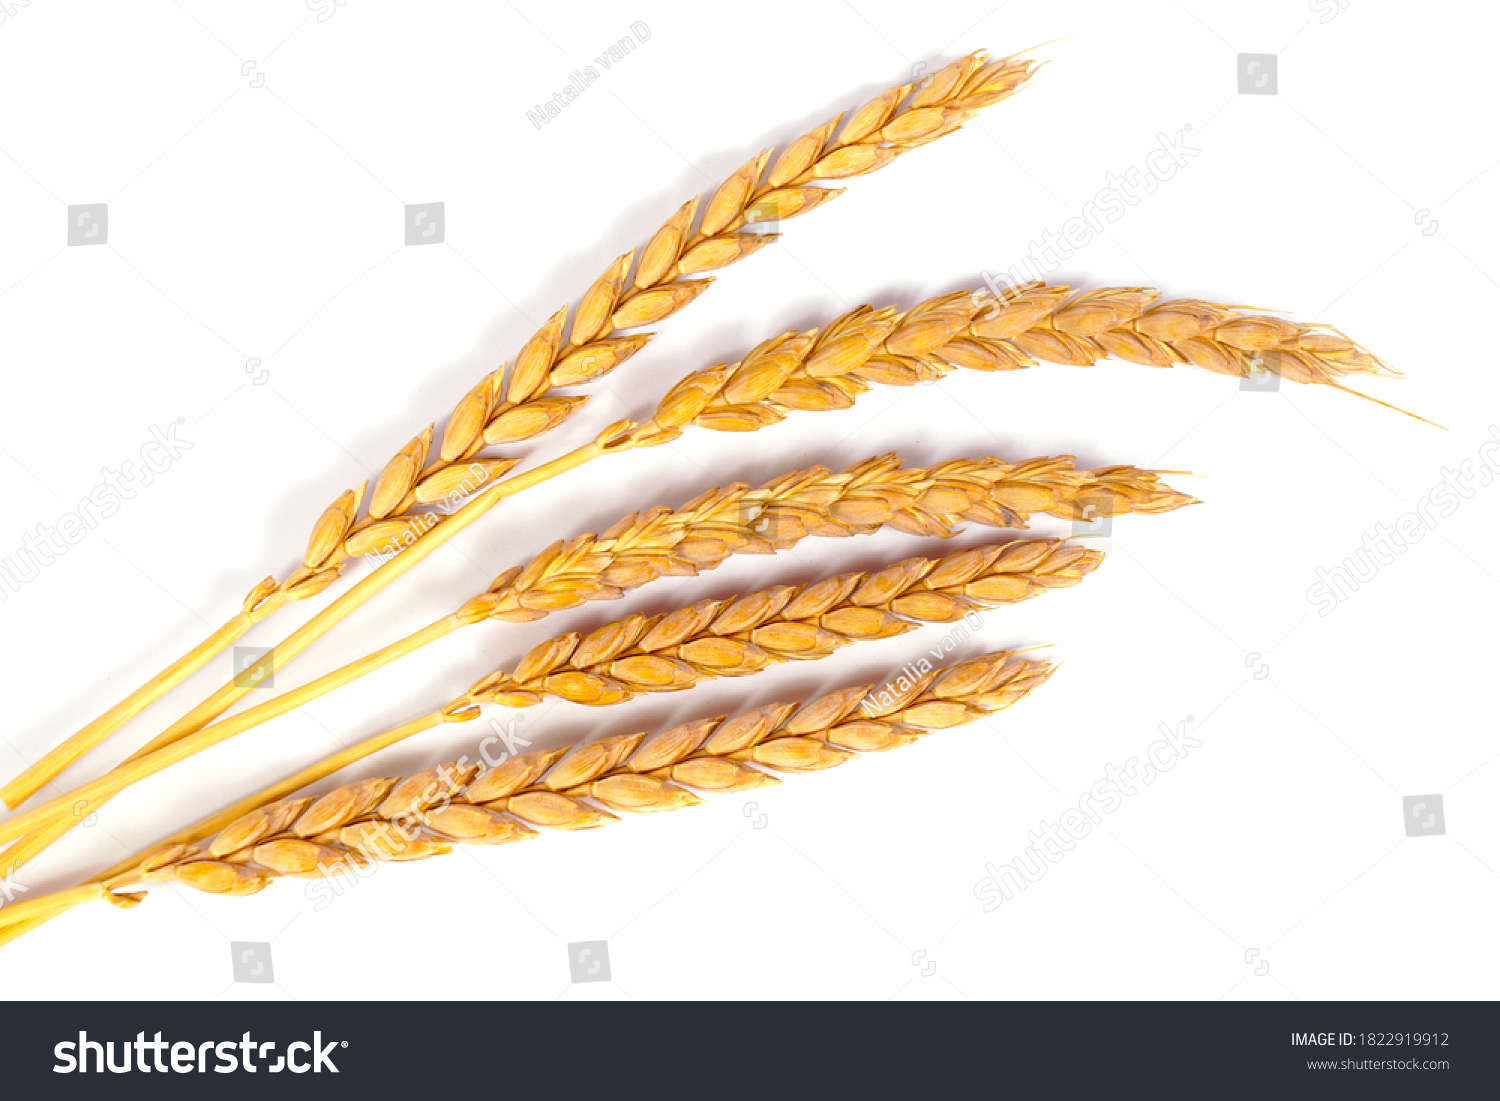 a bright closeup of a bunch of golden ripe dinkel hulled wheat Spelt Spelt (Triticum spelta dicoccum) rye grain relict crop health food ready for harvest isolated on white #1822919912